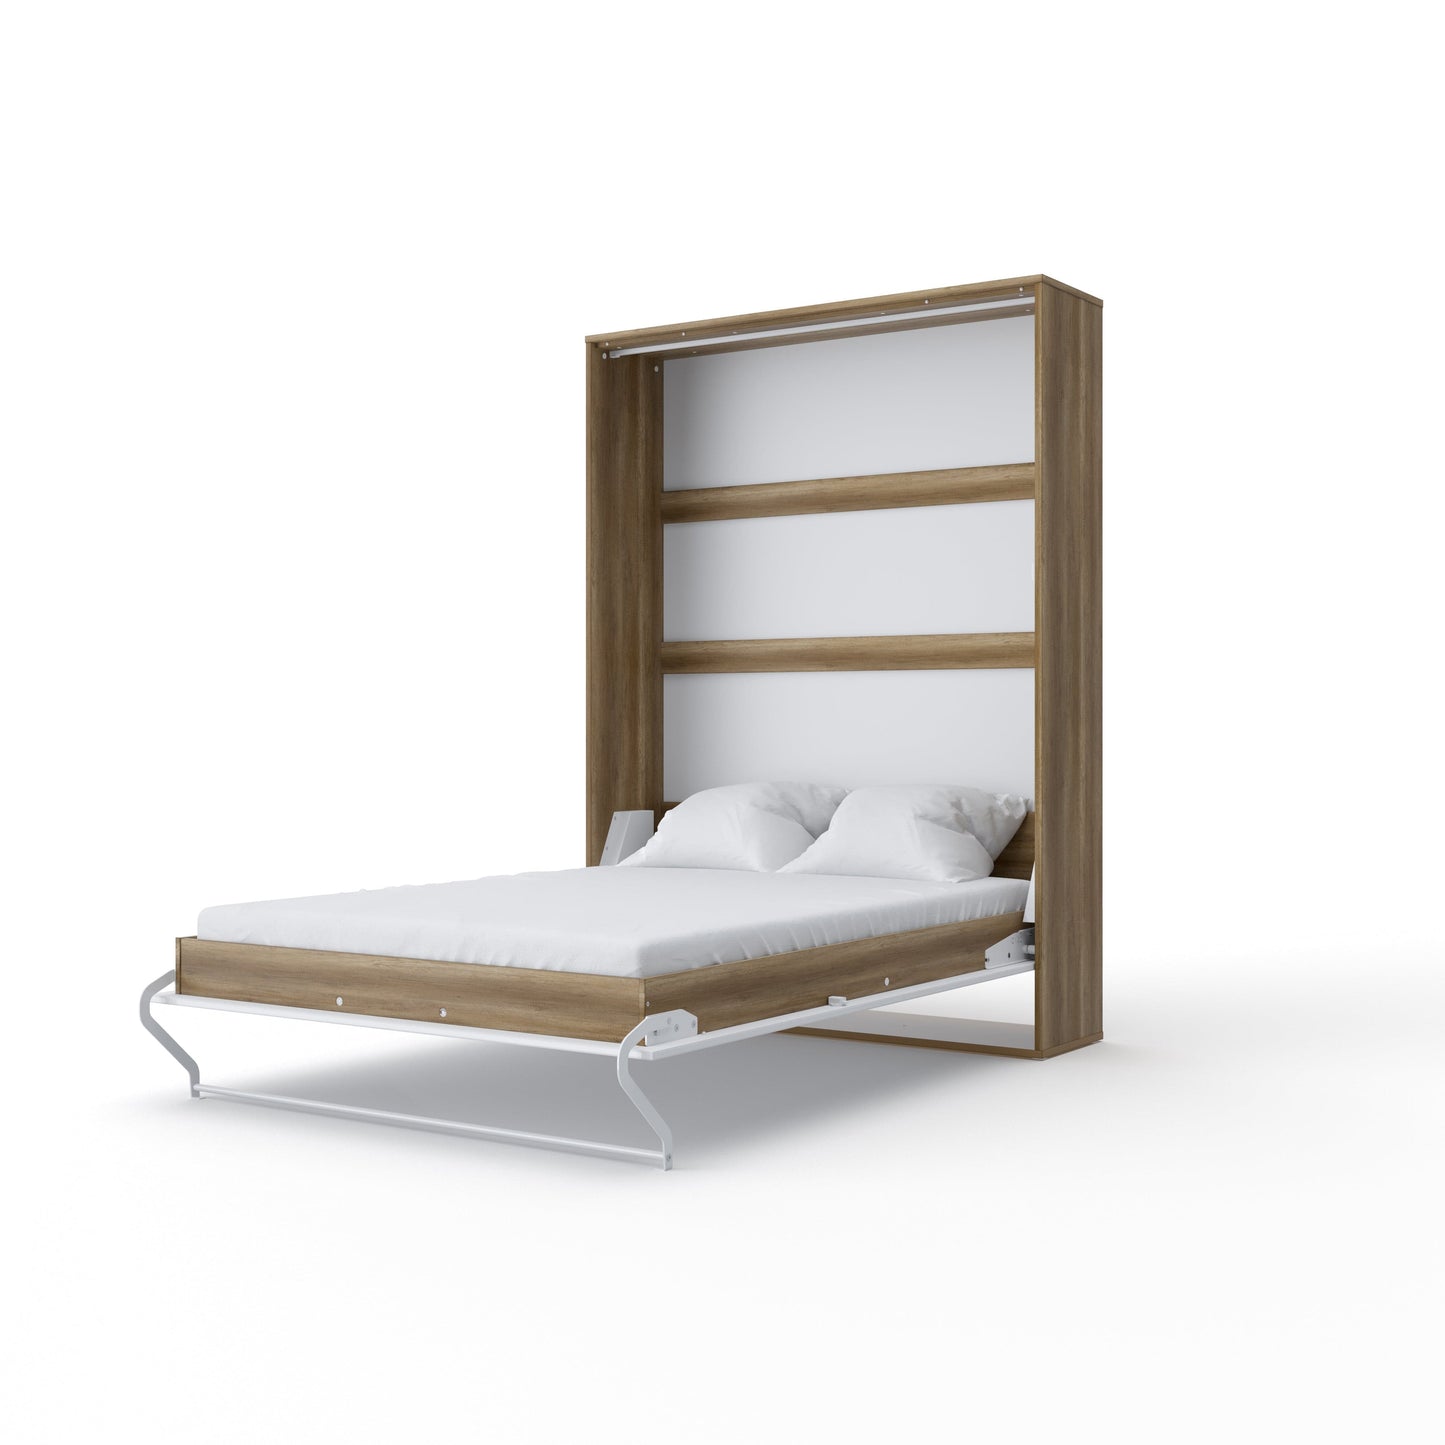 Maxima House Maxima House Vertical Murphy Bed Invento, European Full XL Size with mattress